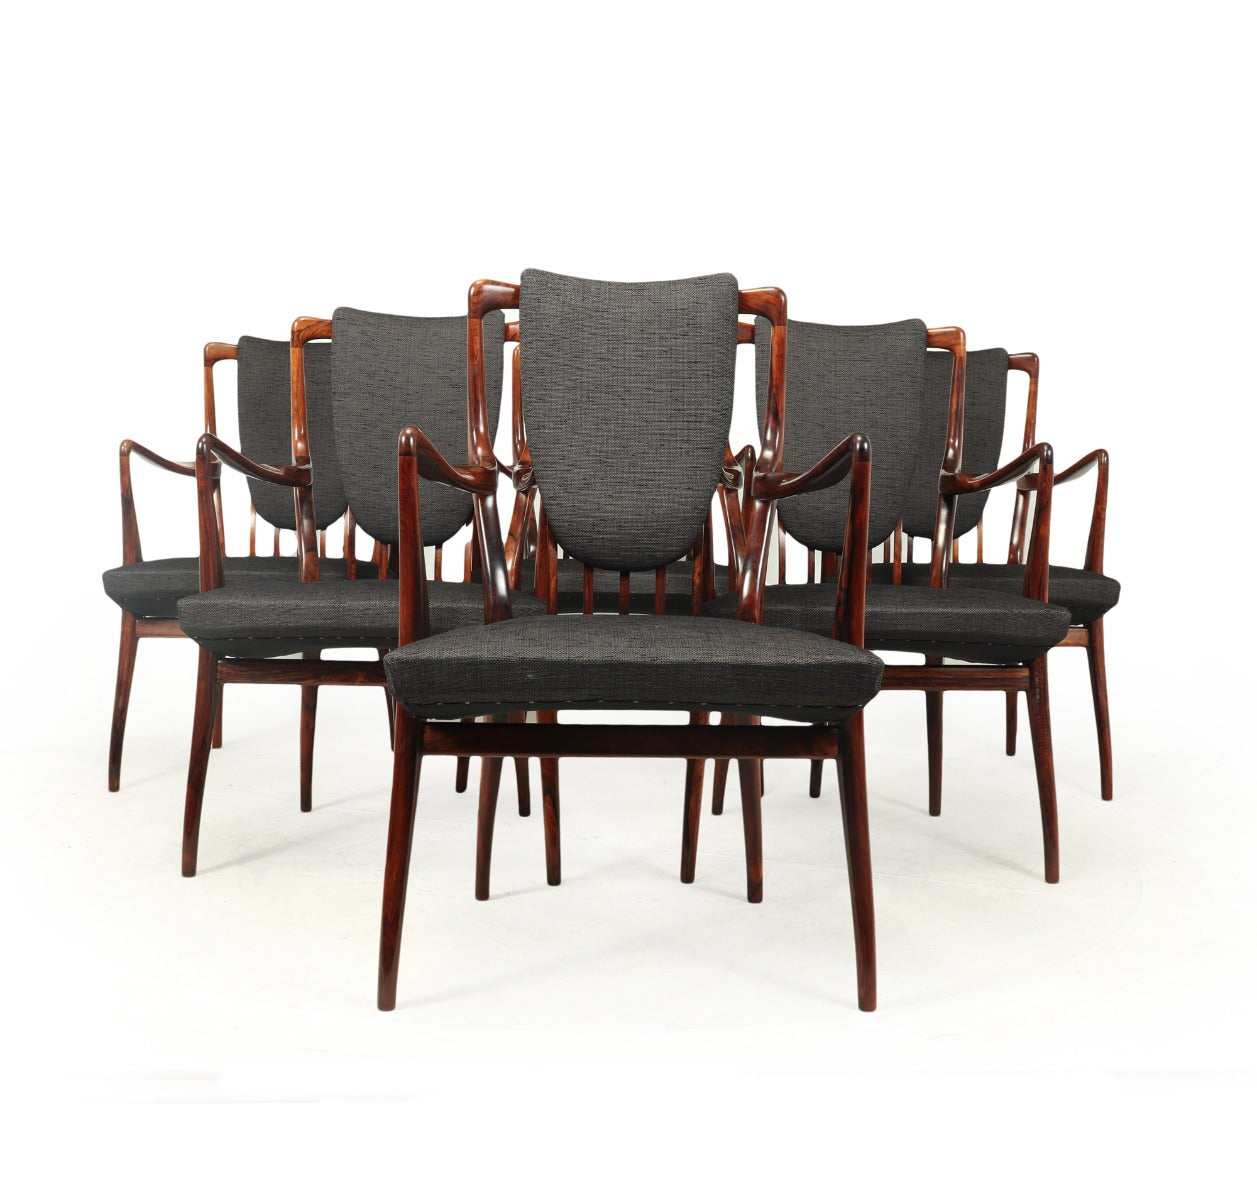 Set of 6 Carver Chairs by Andrew Milne